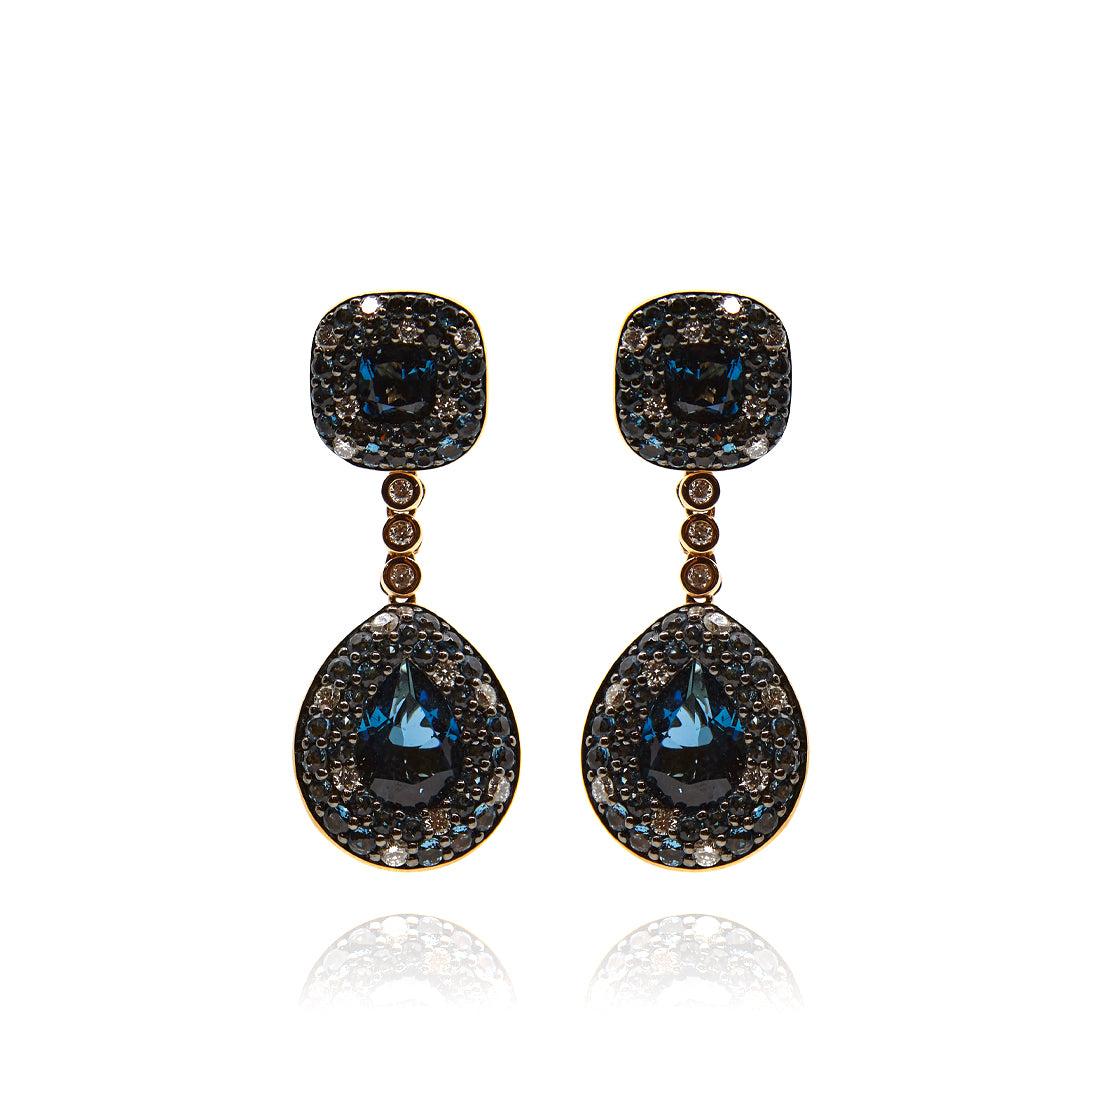 Rose gold earrings with London blue topaz and diamonds